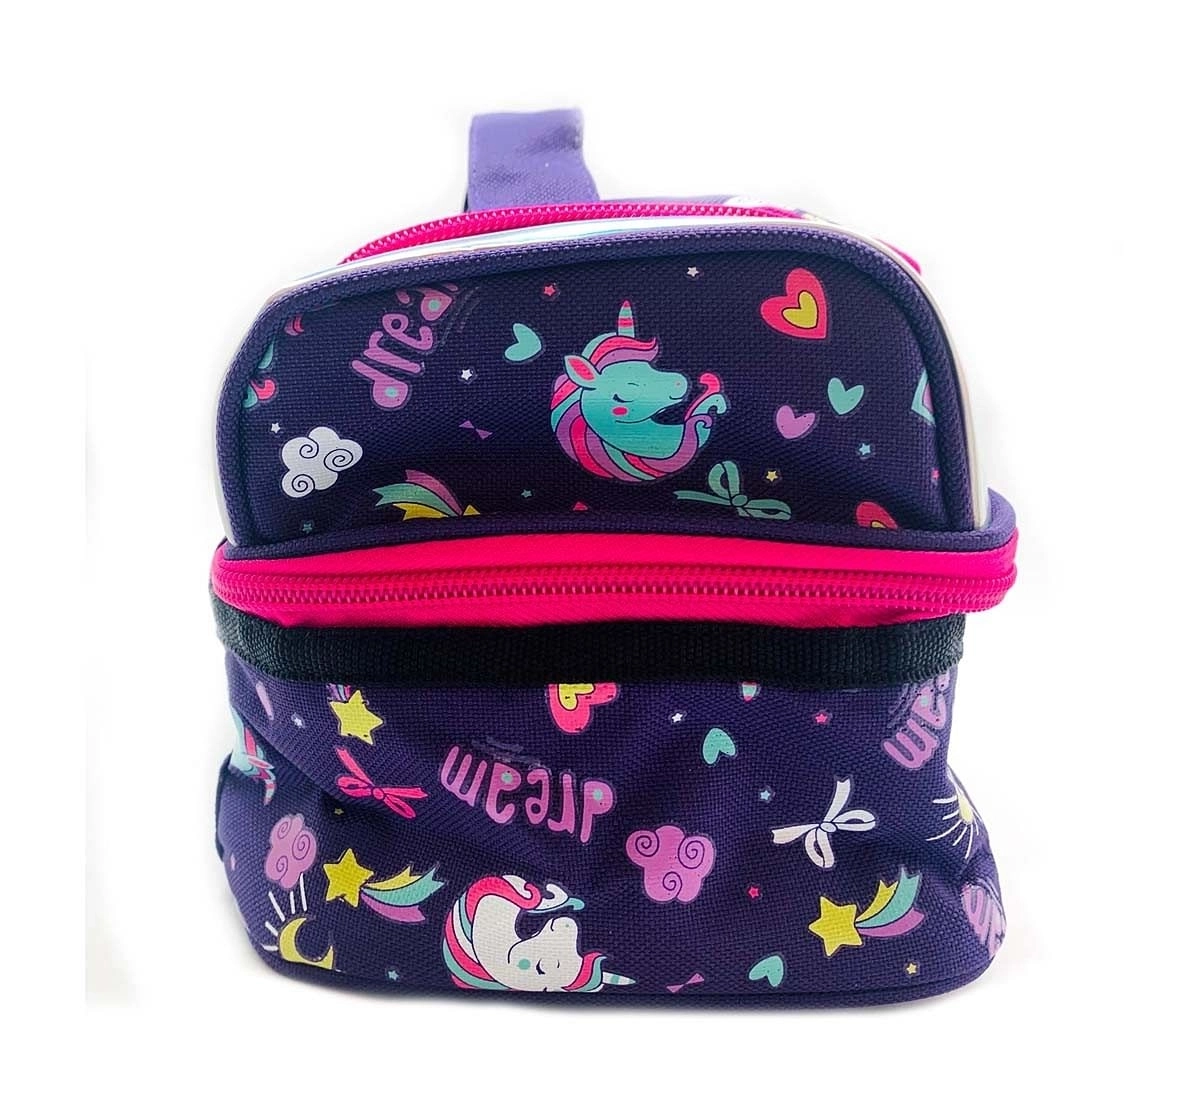 Hamster London Straight Fire Lunch Bag Unicorn Bags for Age 3Y+ (Purple)